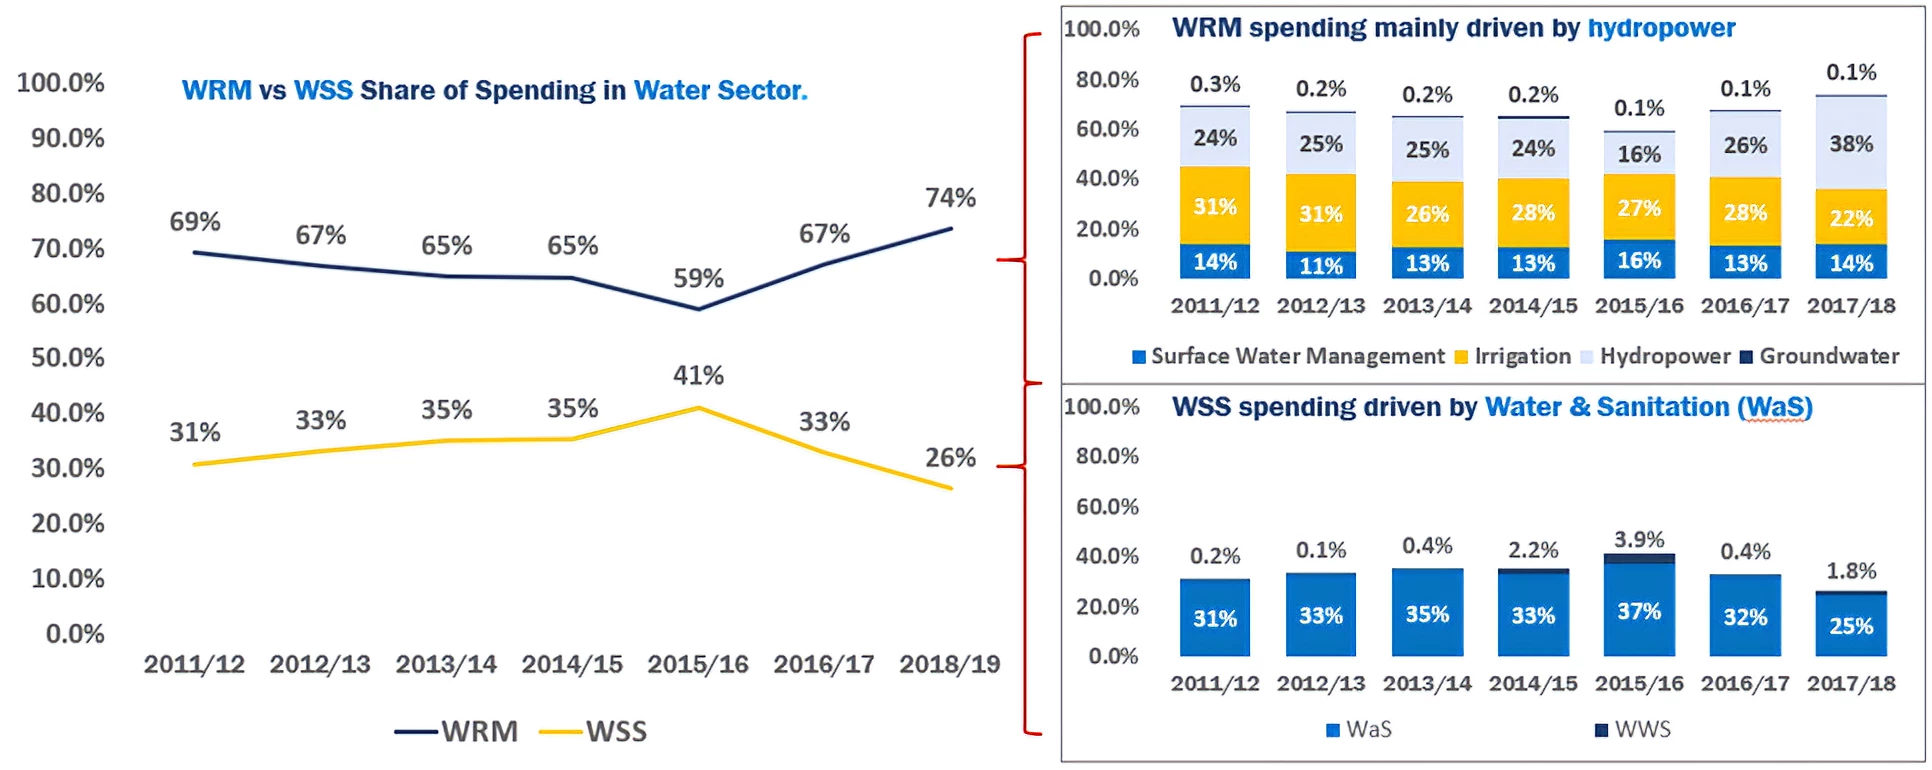 Figure 2: In Nepal, WRM spending is higher than WSS, driven by expenditure in hydropower. World Bank